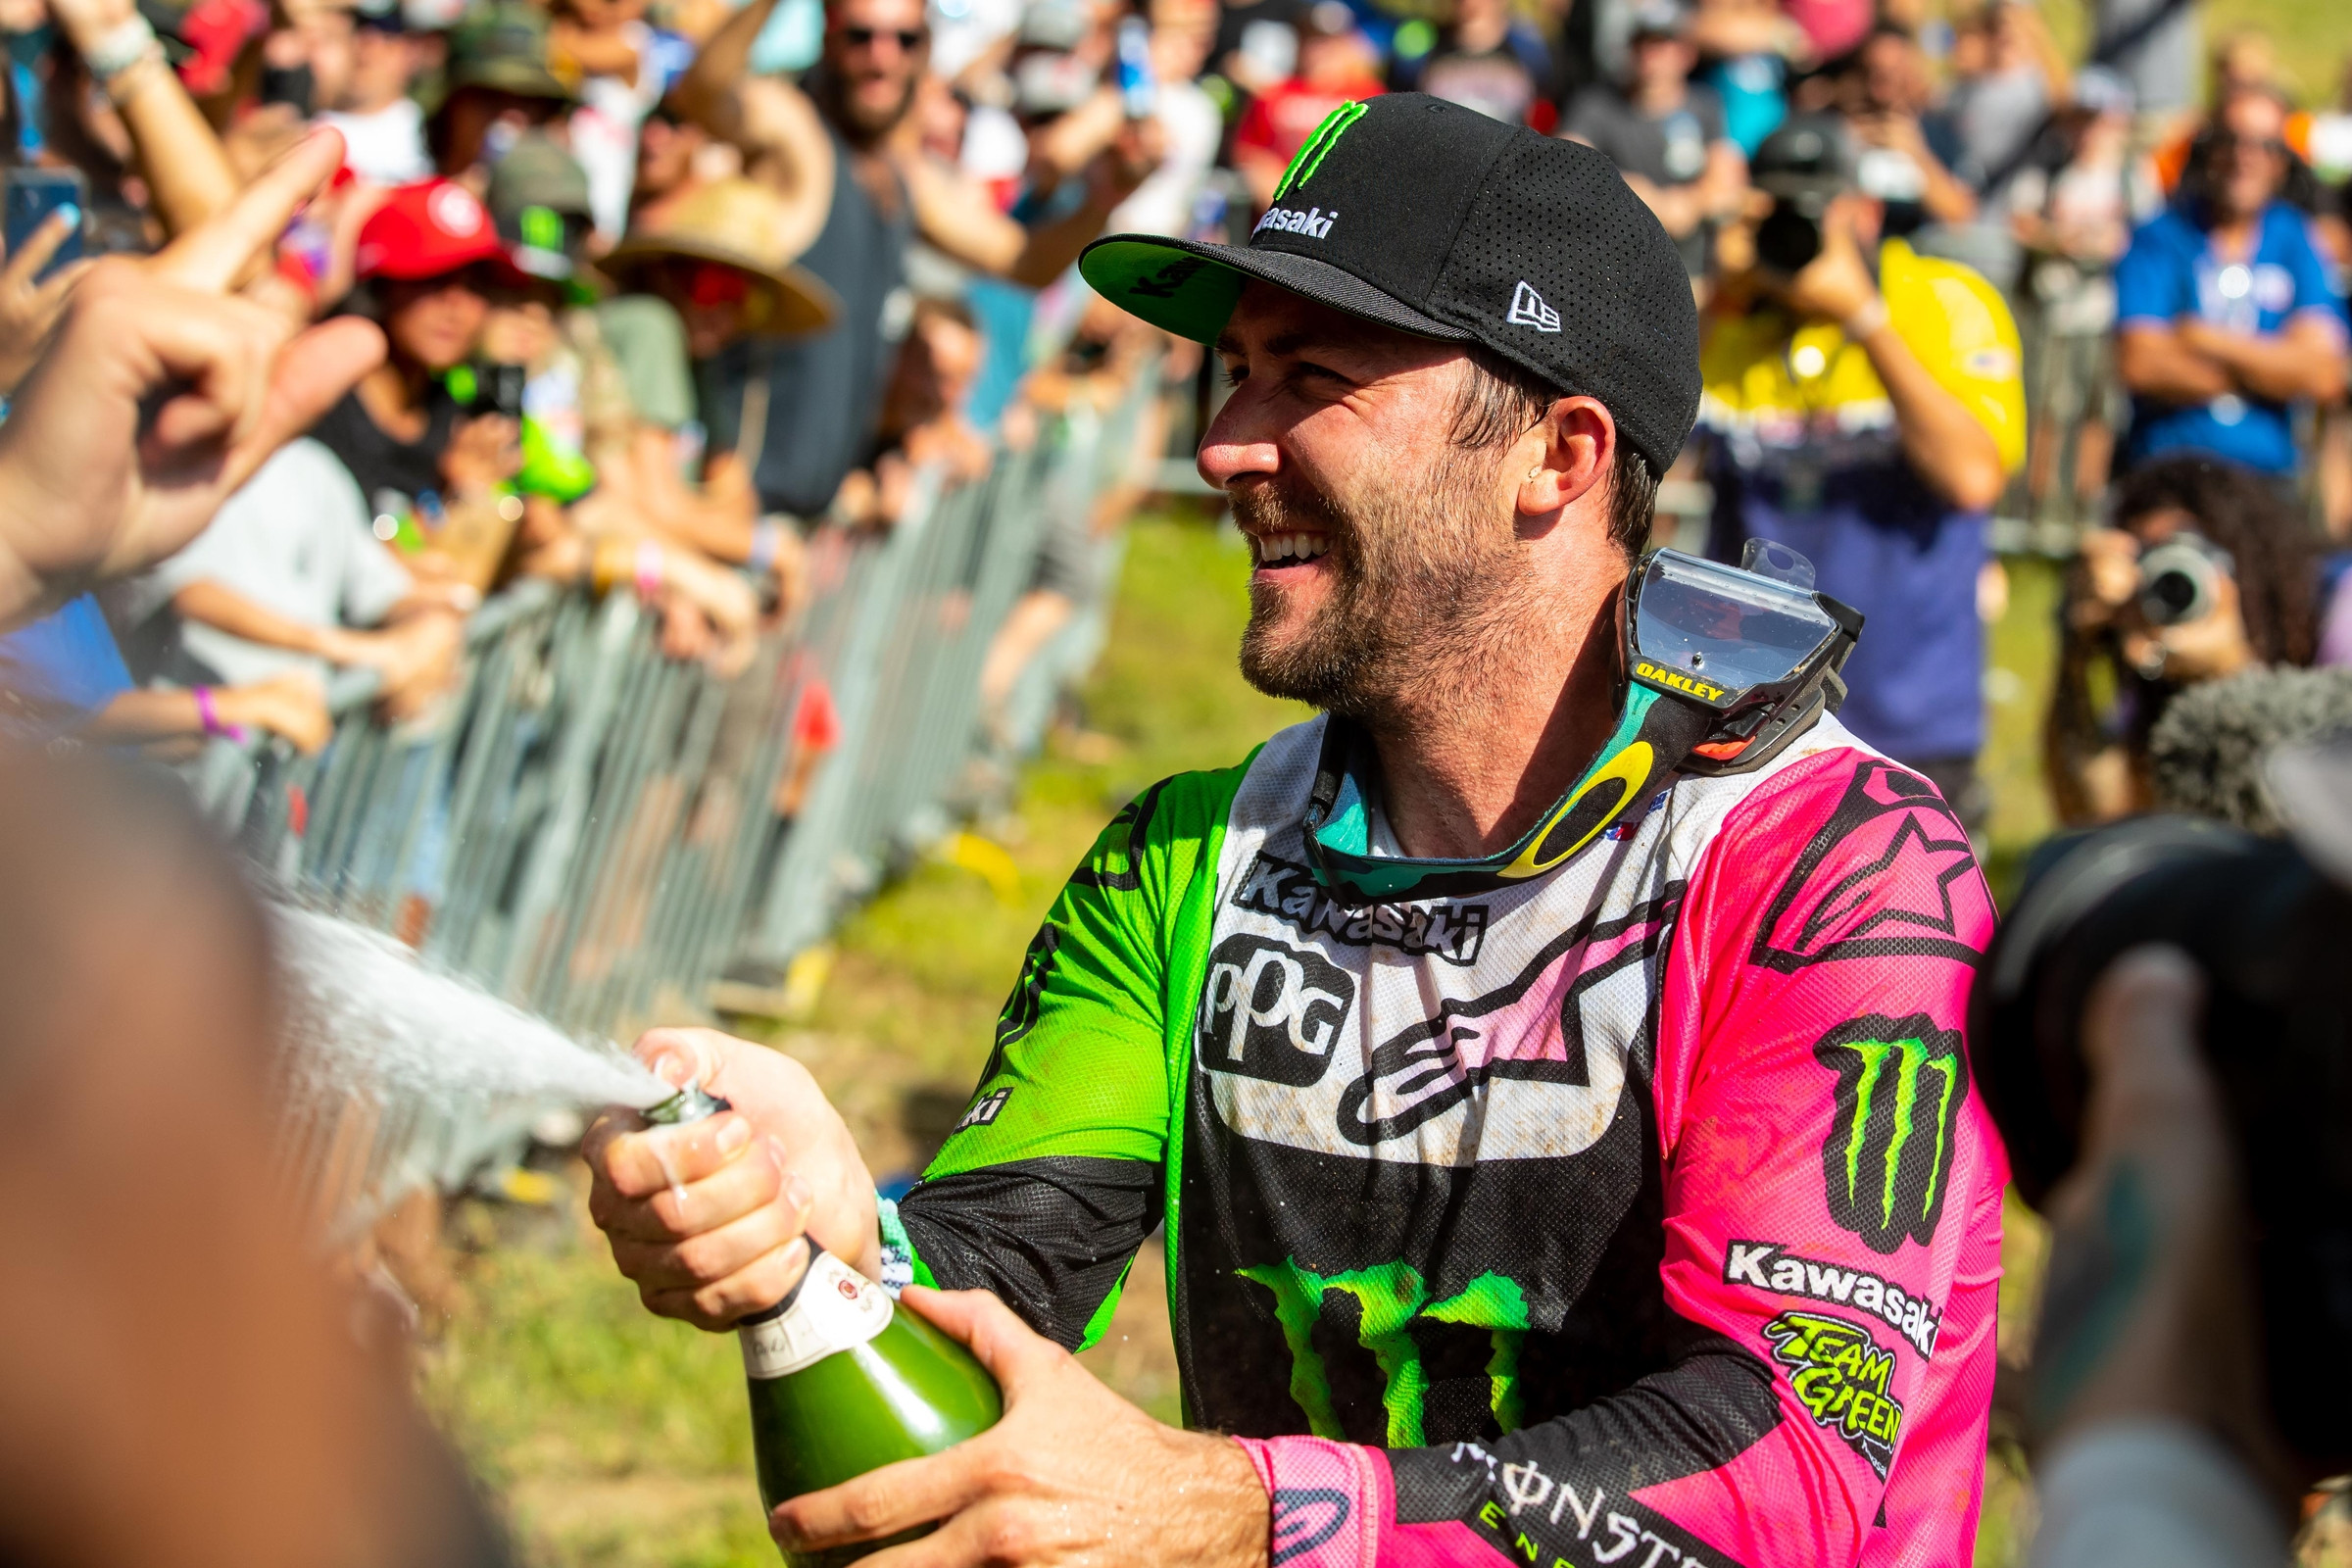 Eli Tomac on First Overall Win of 2021 at Ironman National - Racer X